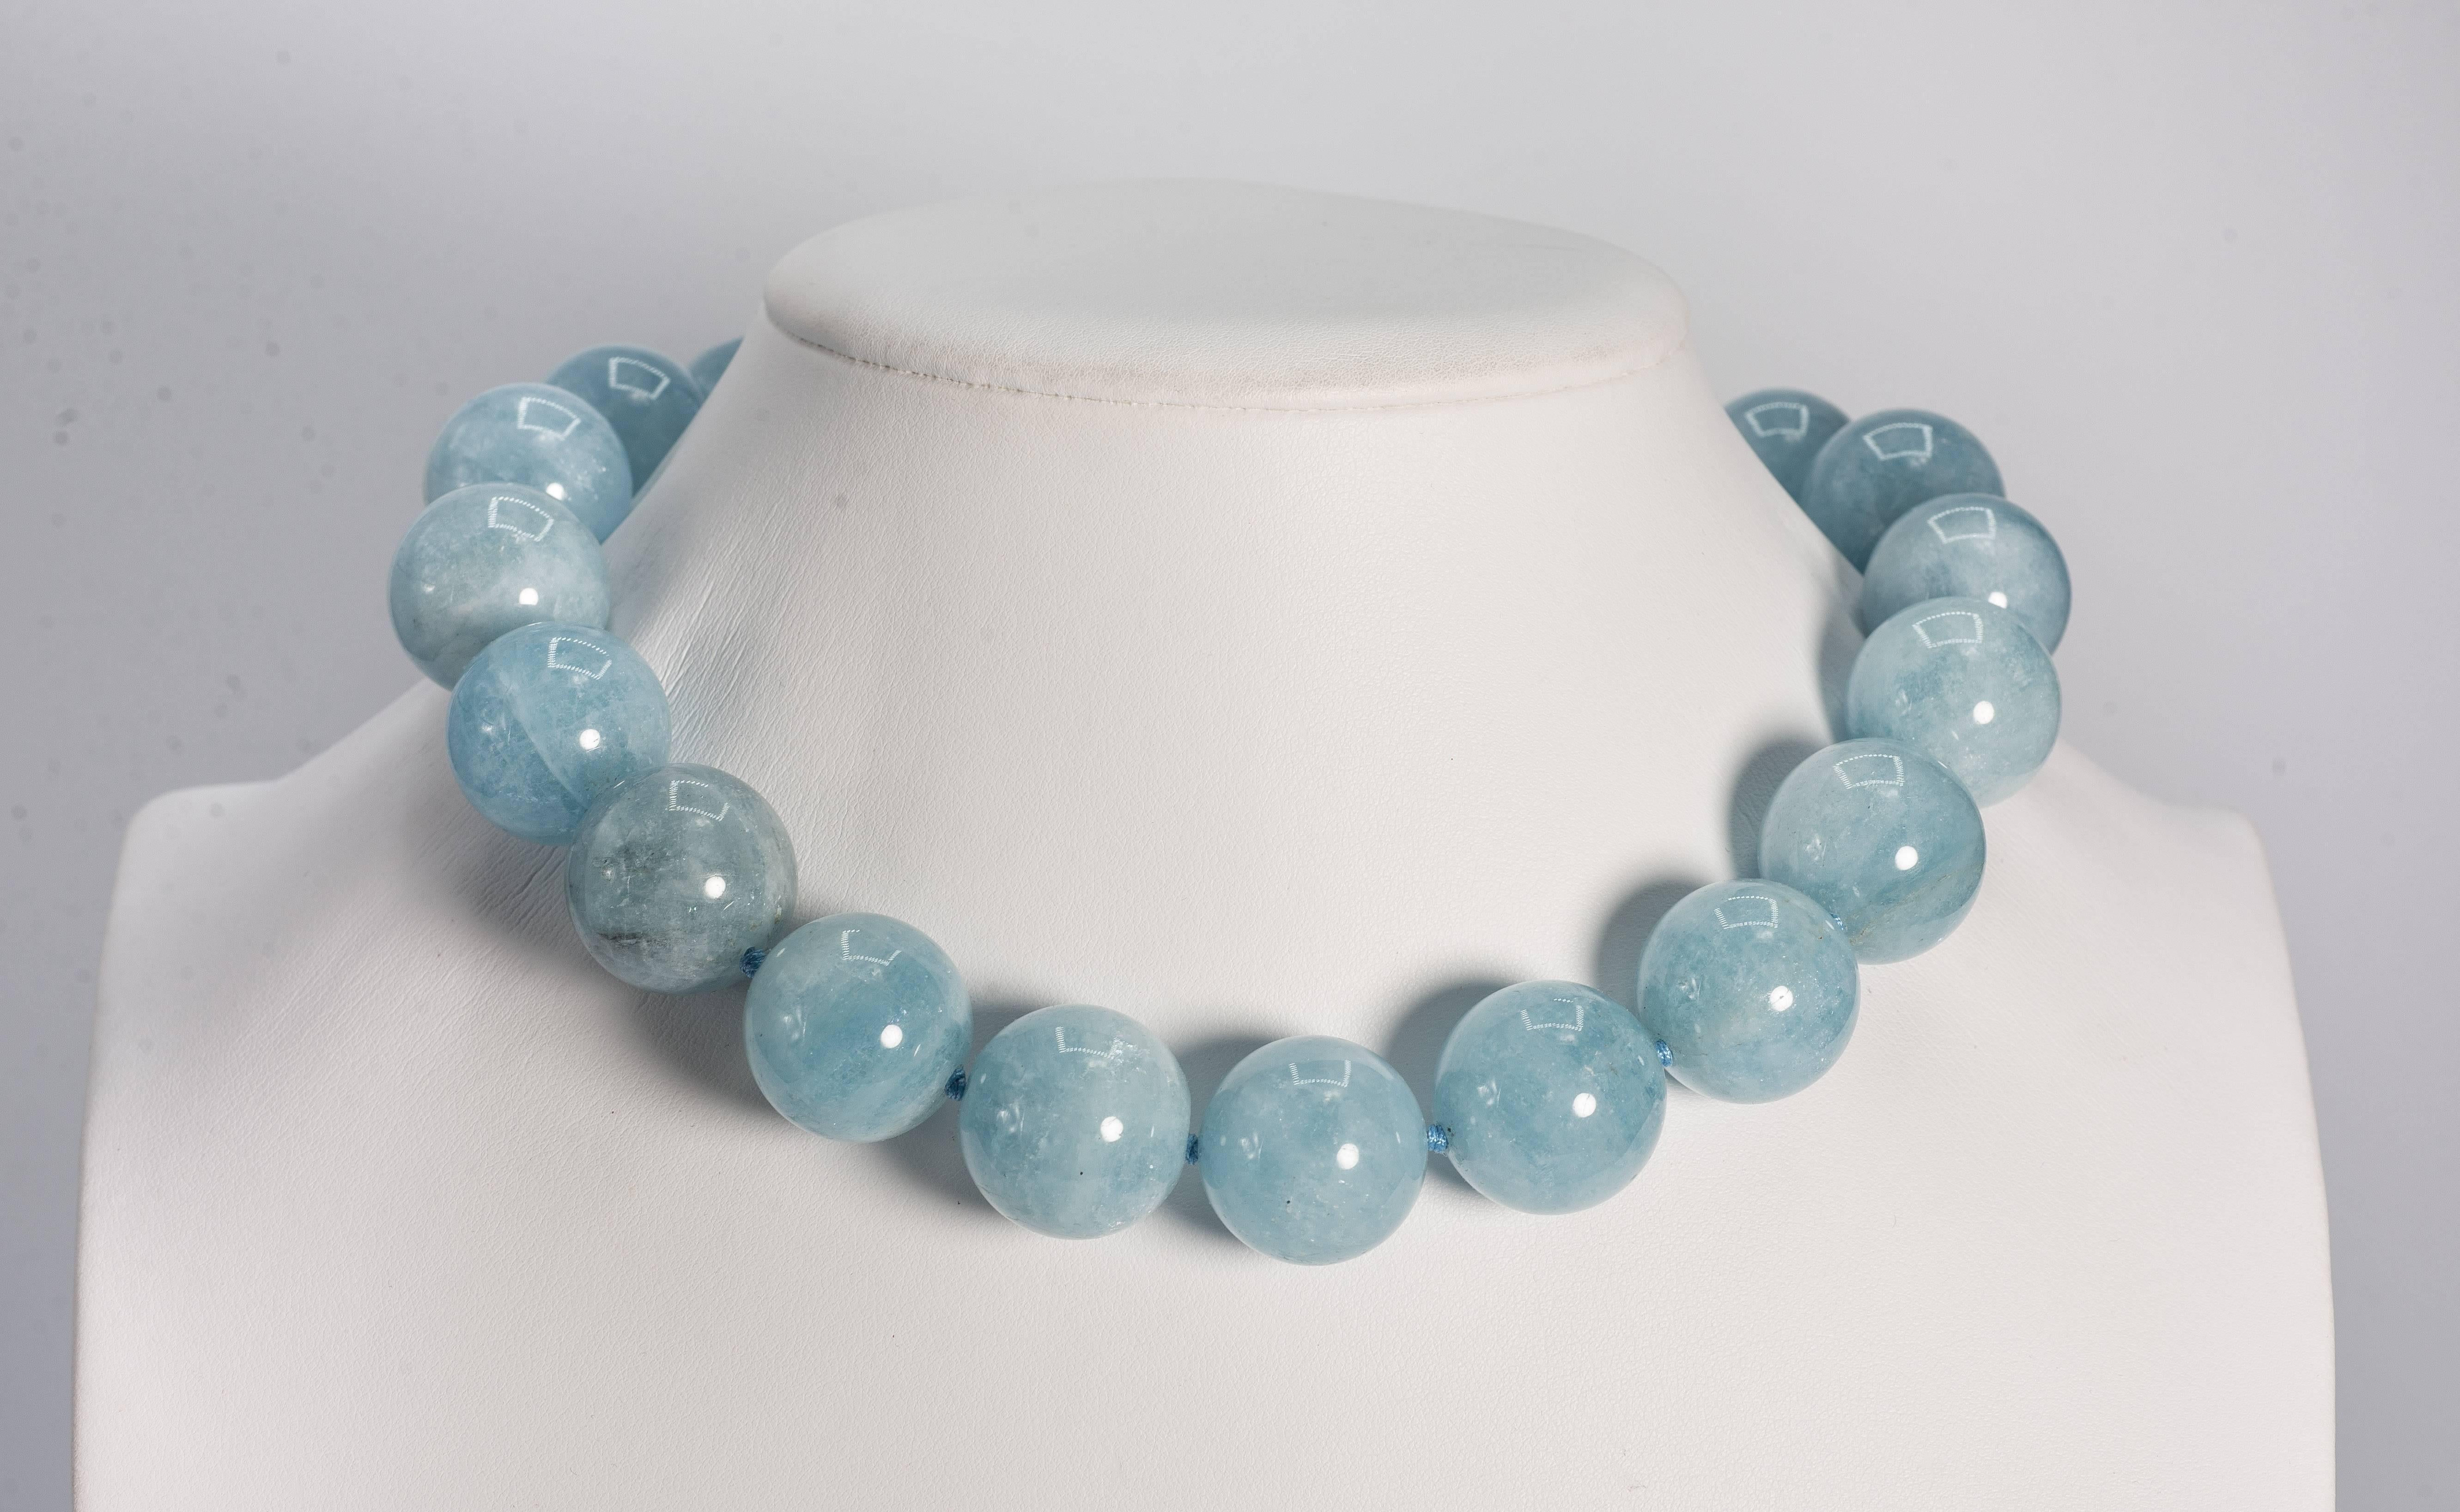 Stunning Nineteen large 22mm round natural Aquamarine beads hand blue silk knotted to a vermeil clasp making a fabulous statement necklace 17'' long. Each bead is about one inch diameter.